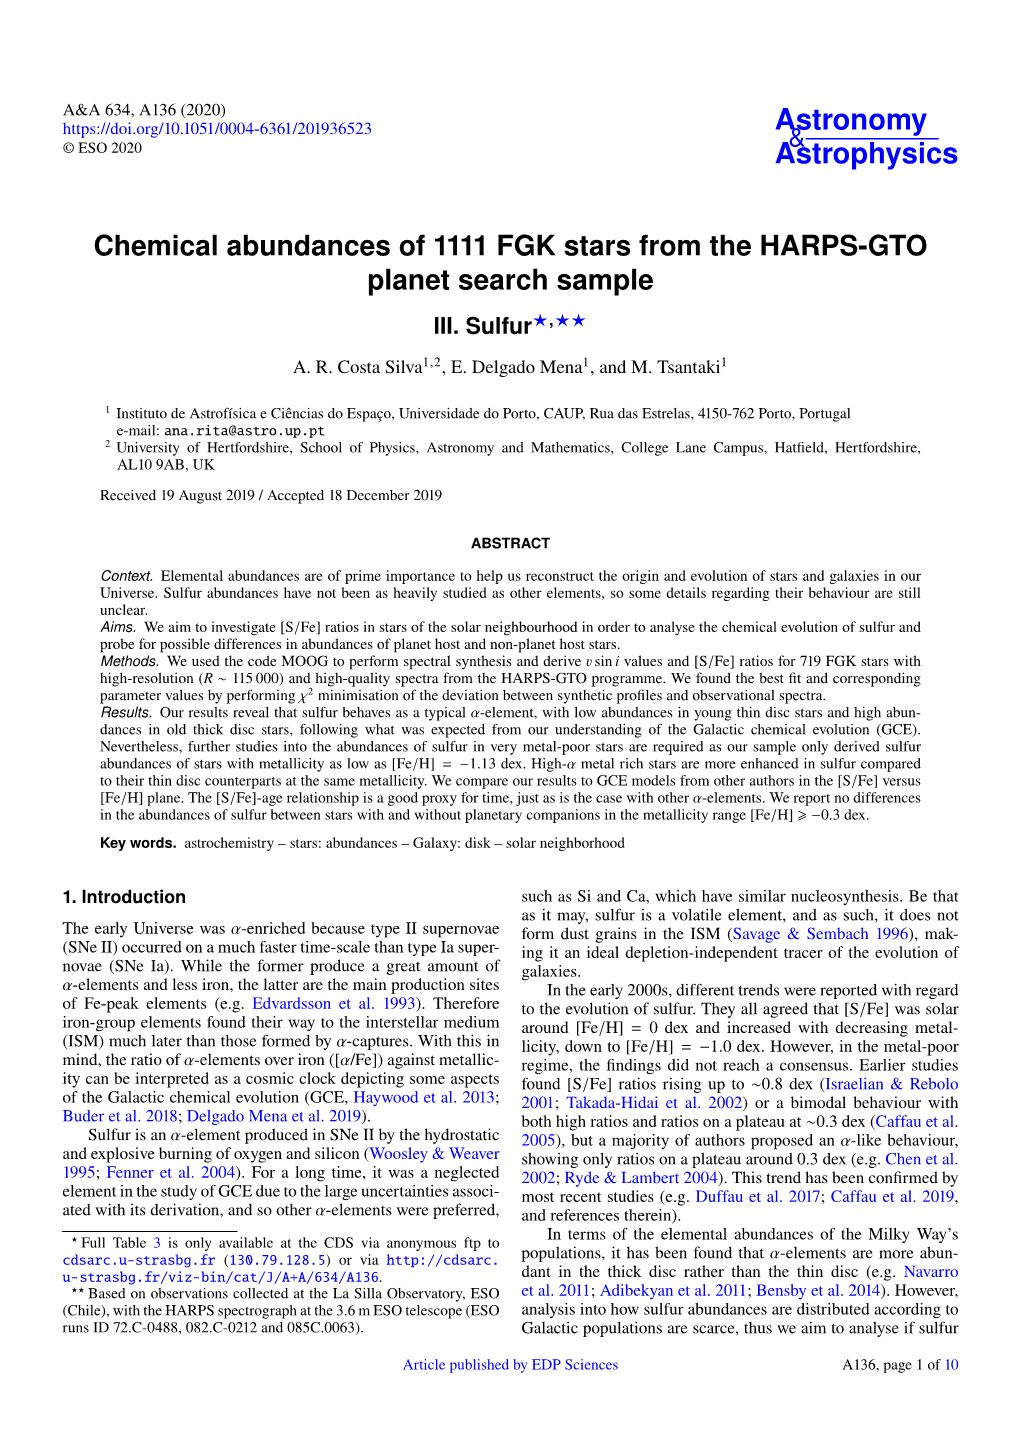 Chemical Abundances of 1111 FGK Stars from the HARPS-GTO Planet Search Sample III